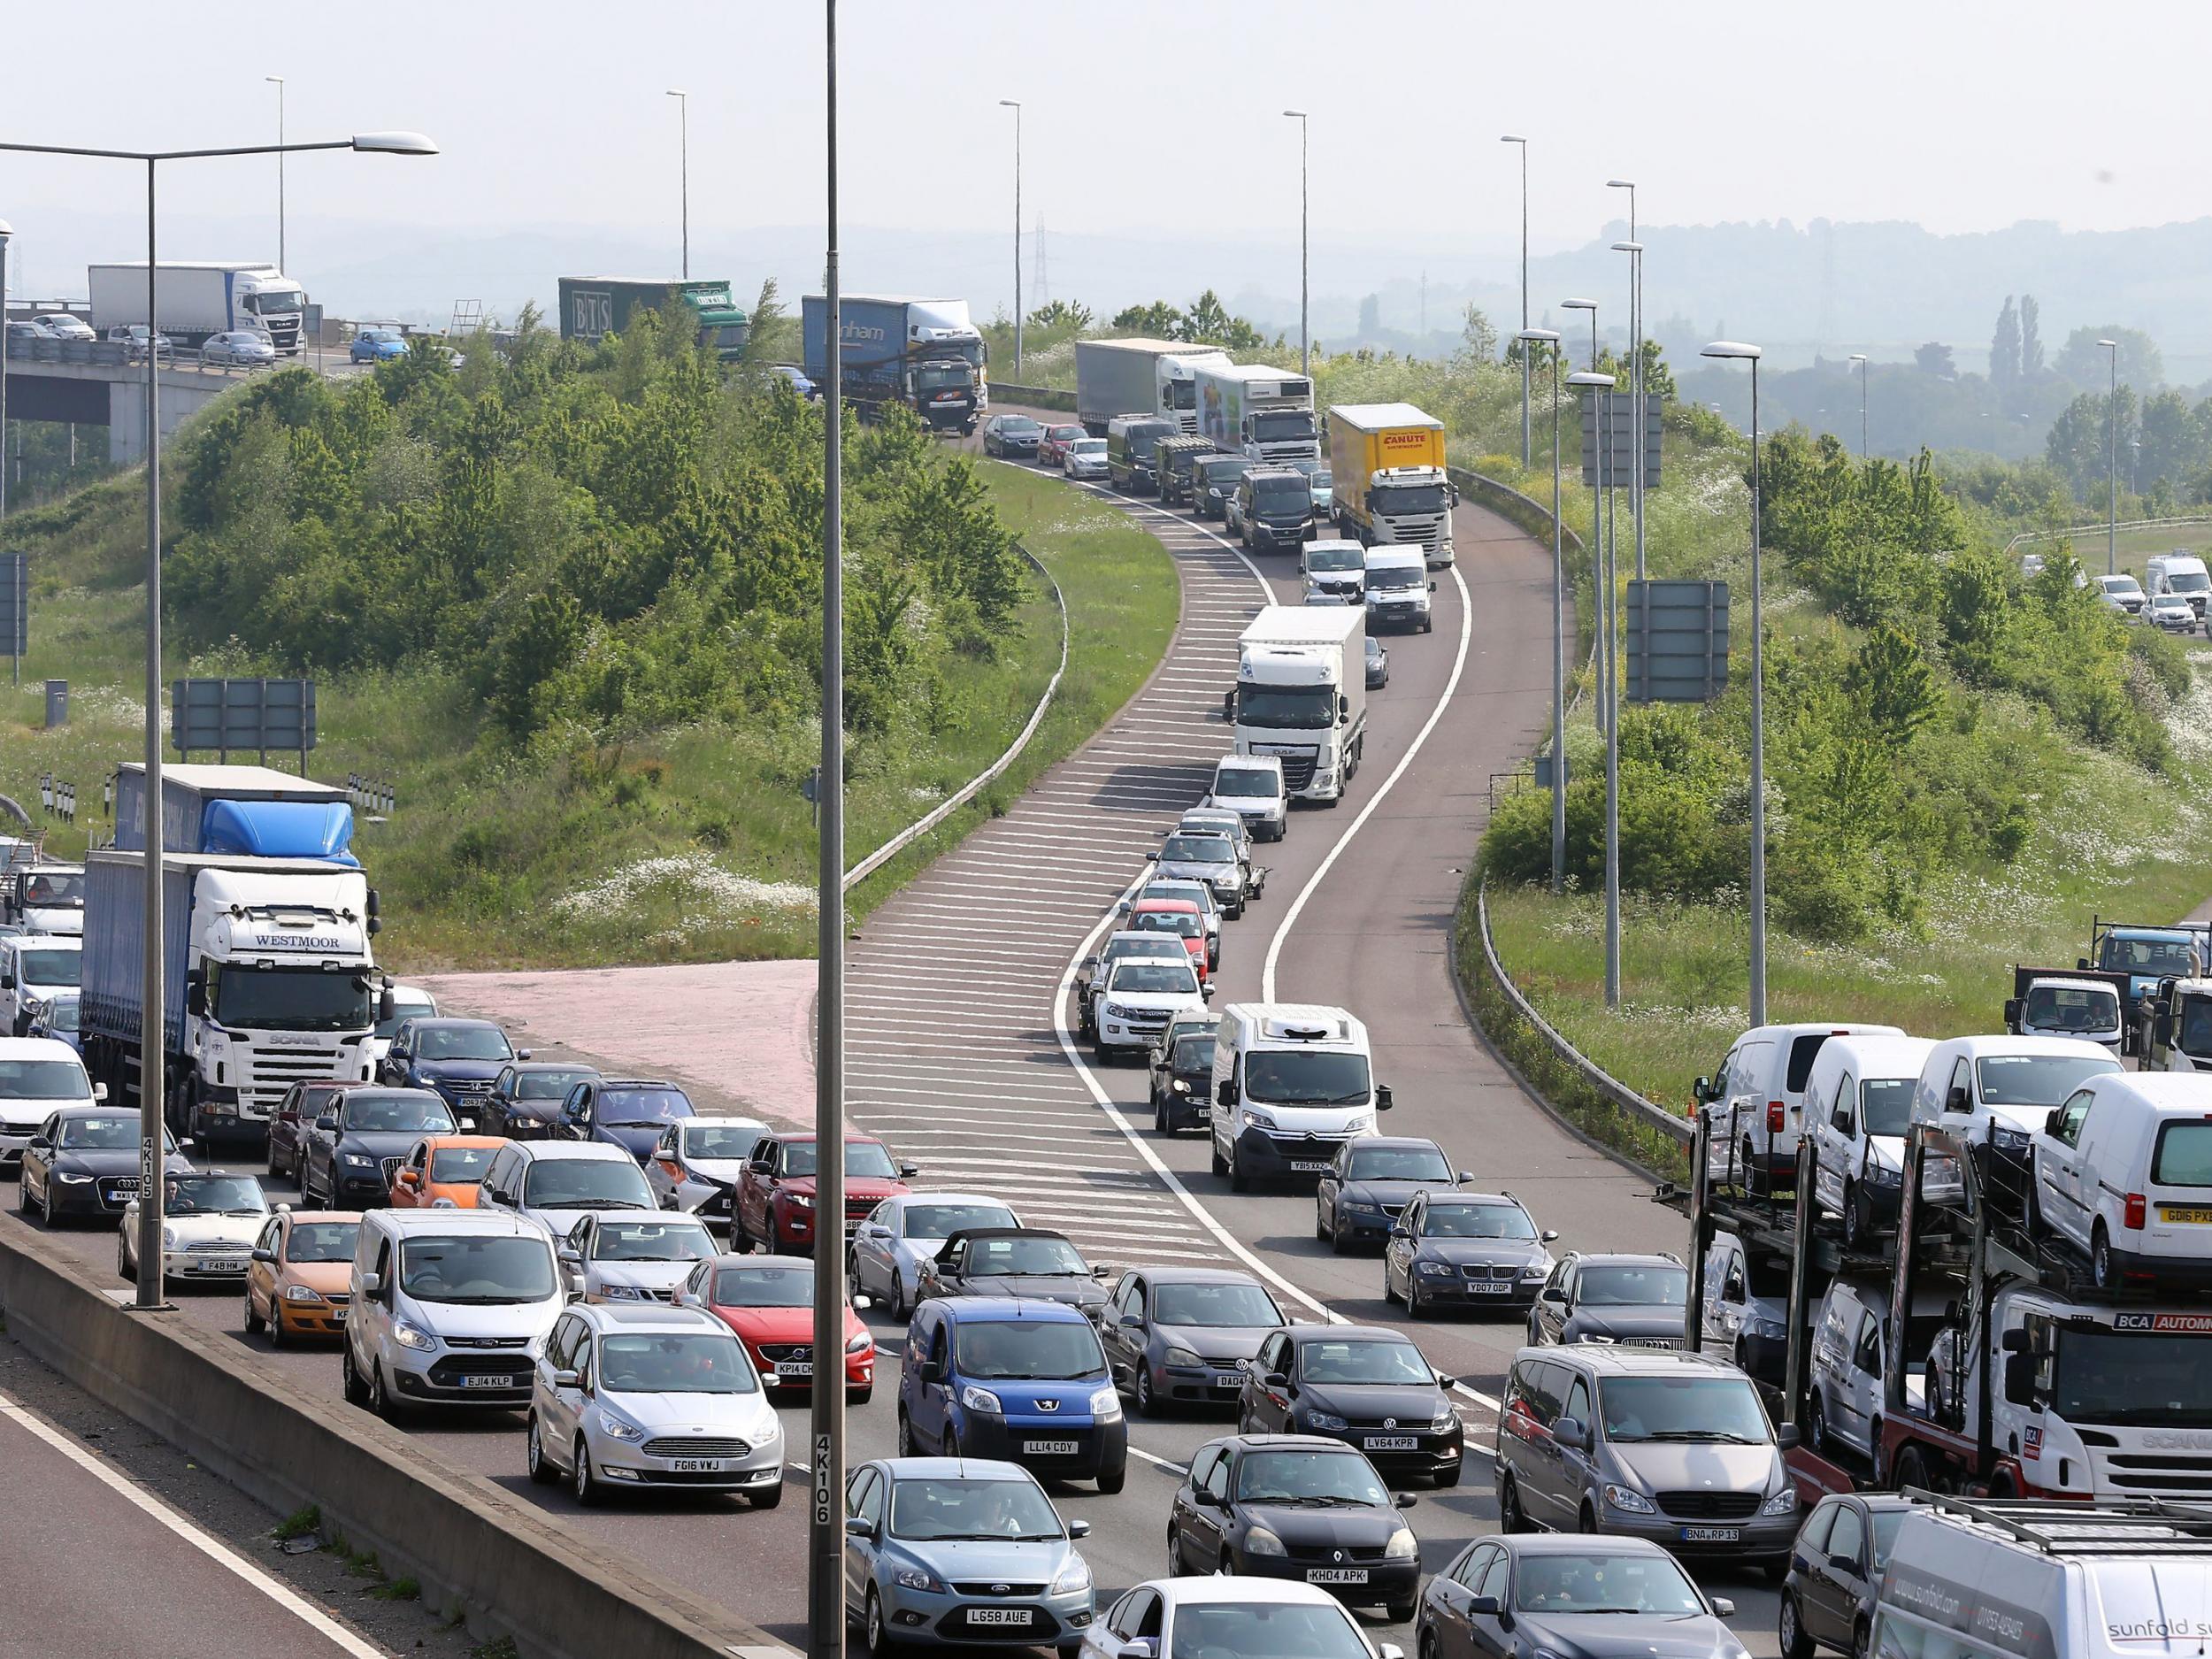 Long traffic jams expected as millions of drivers hit road on ...